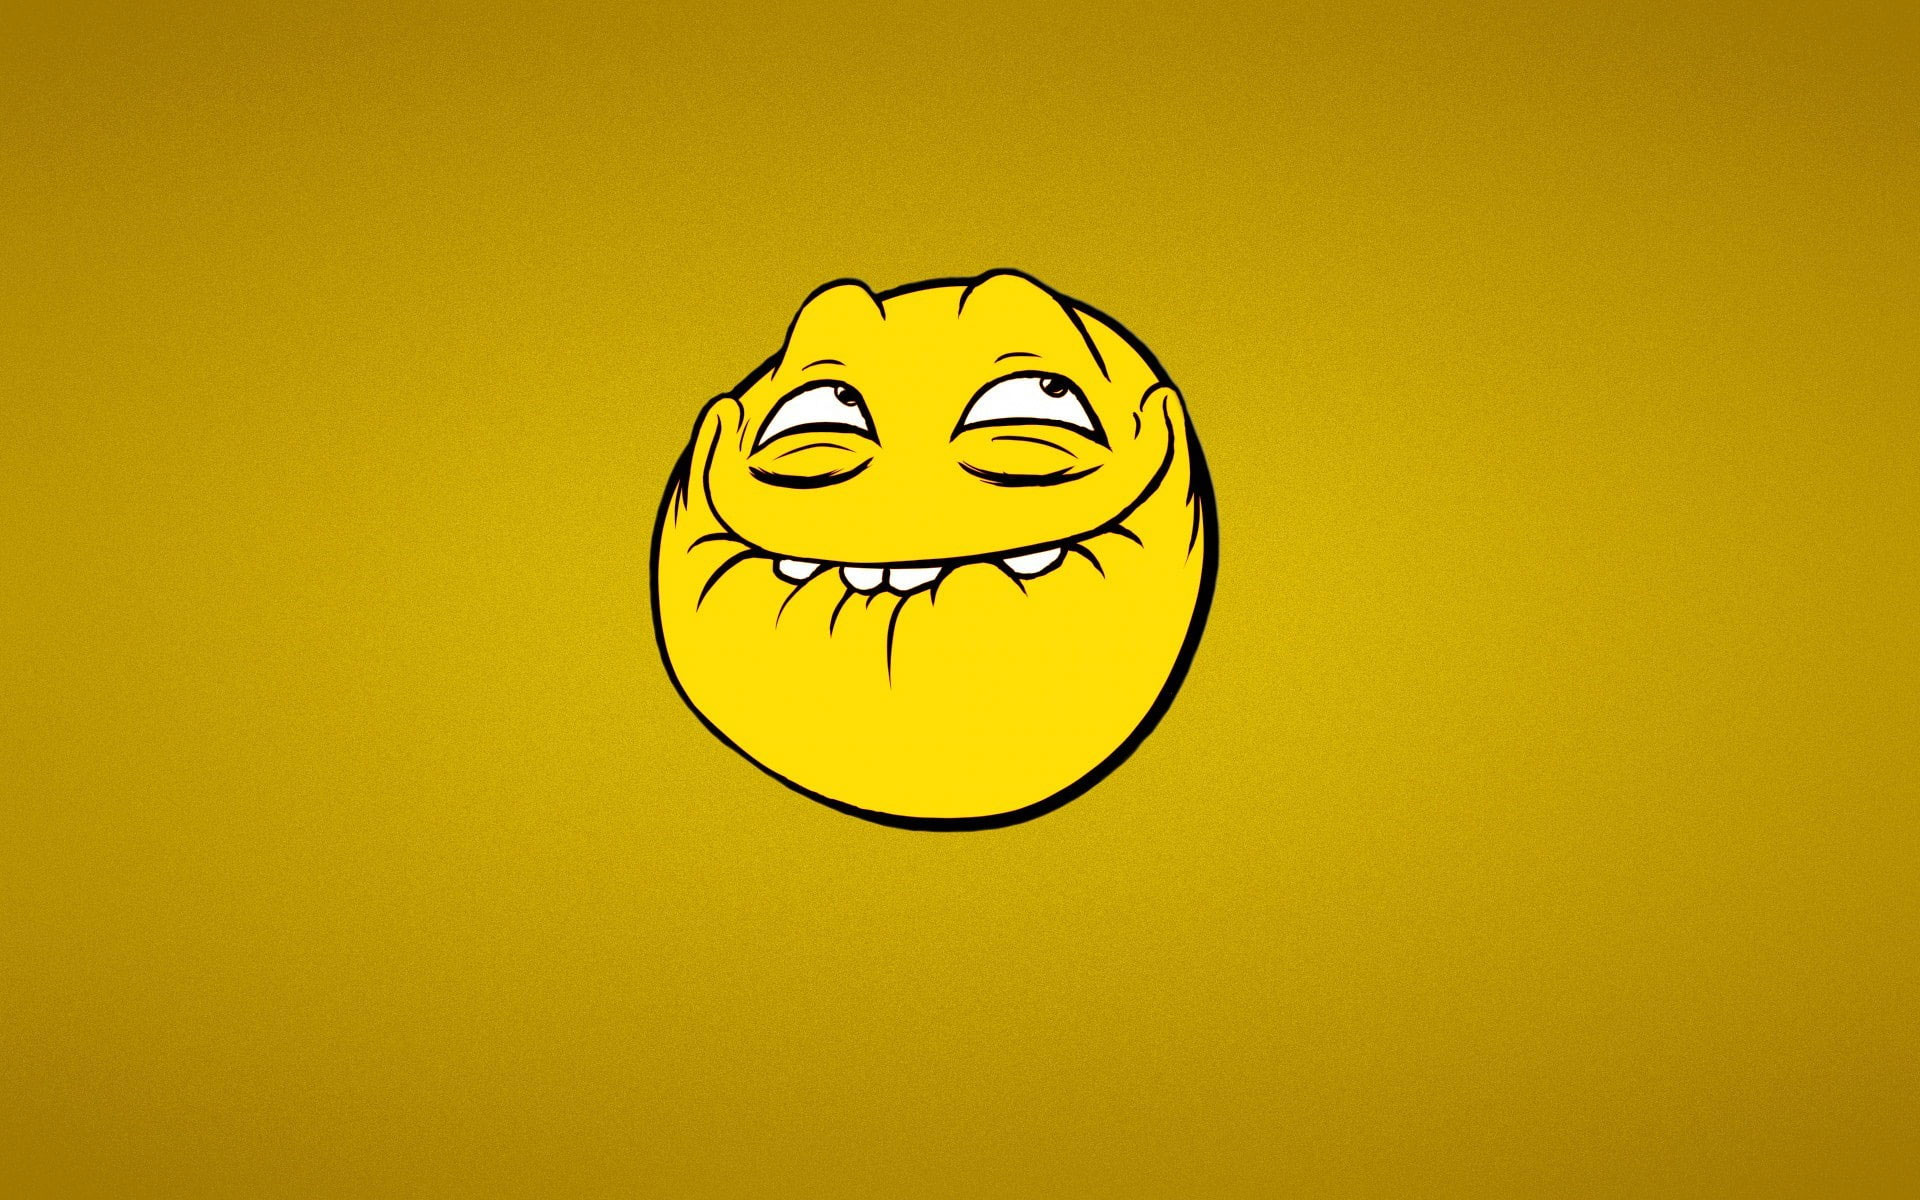 Funny Smile Cartoon wallpaper, Background